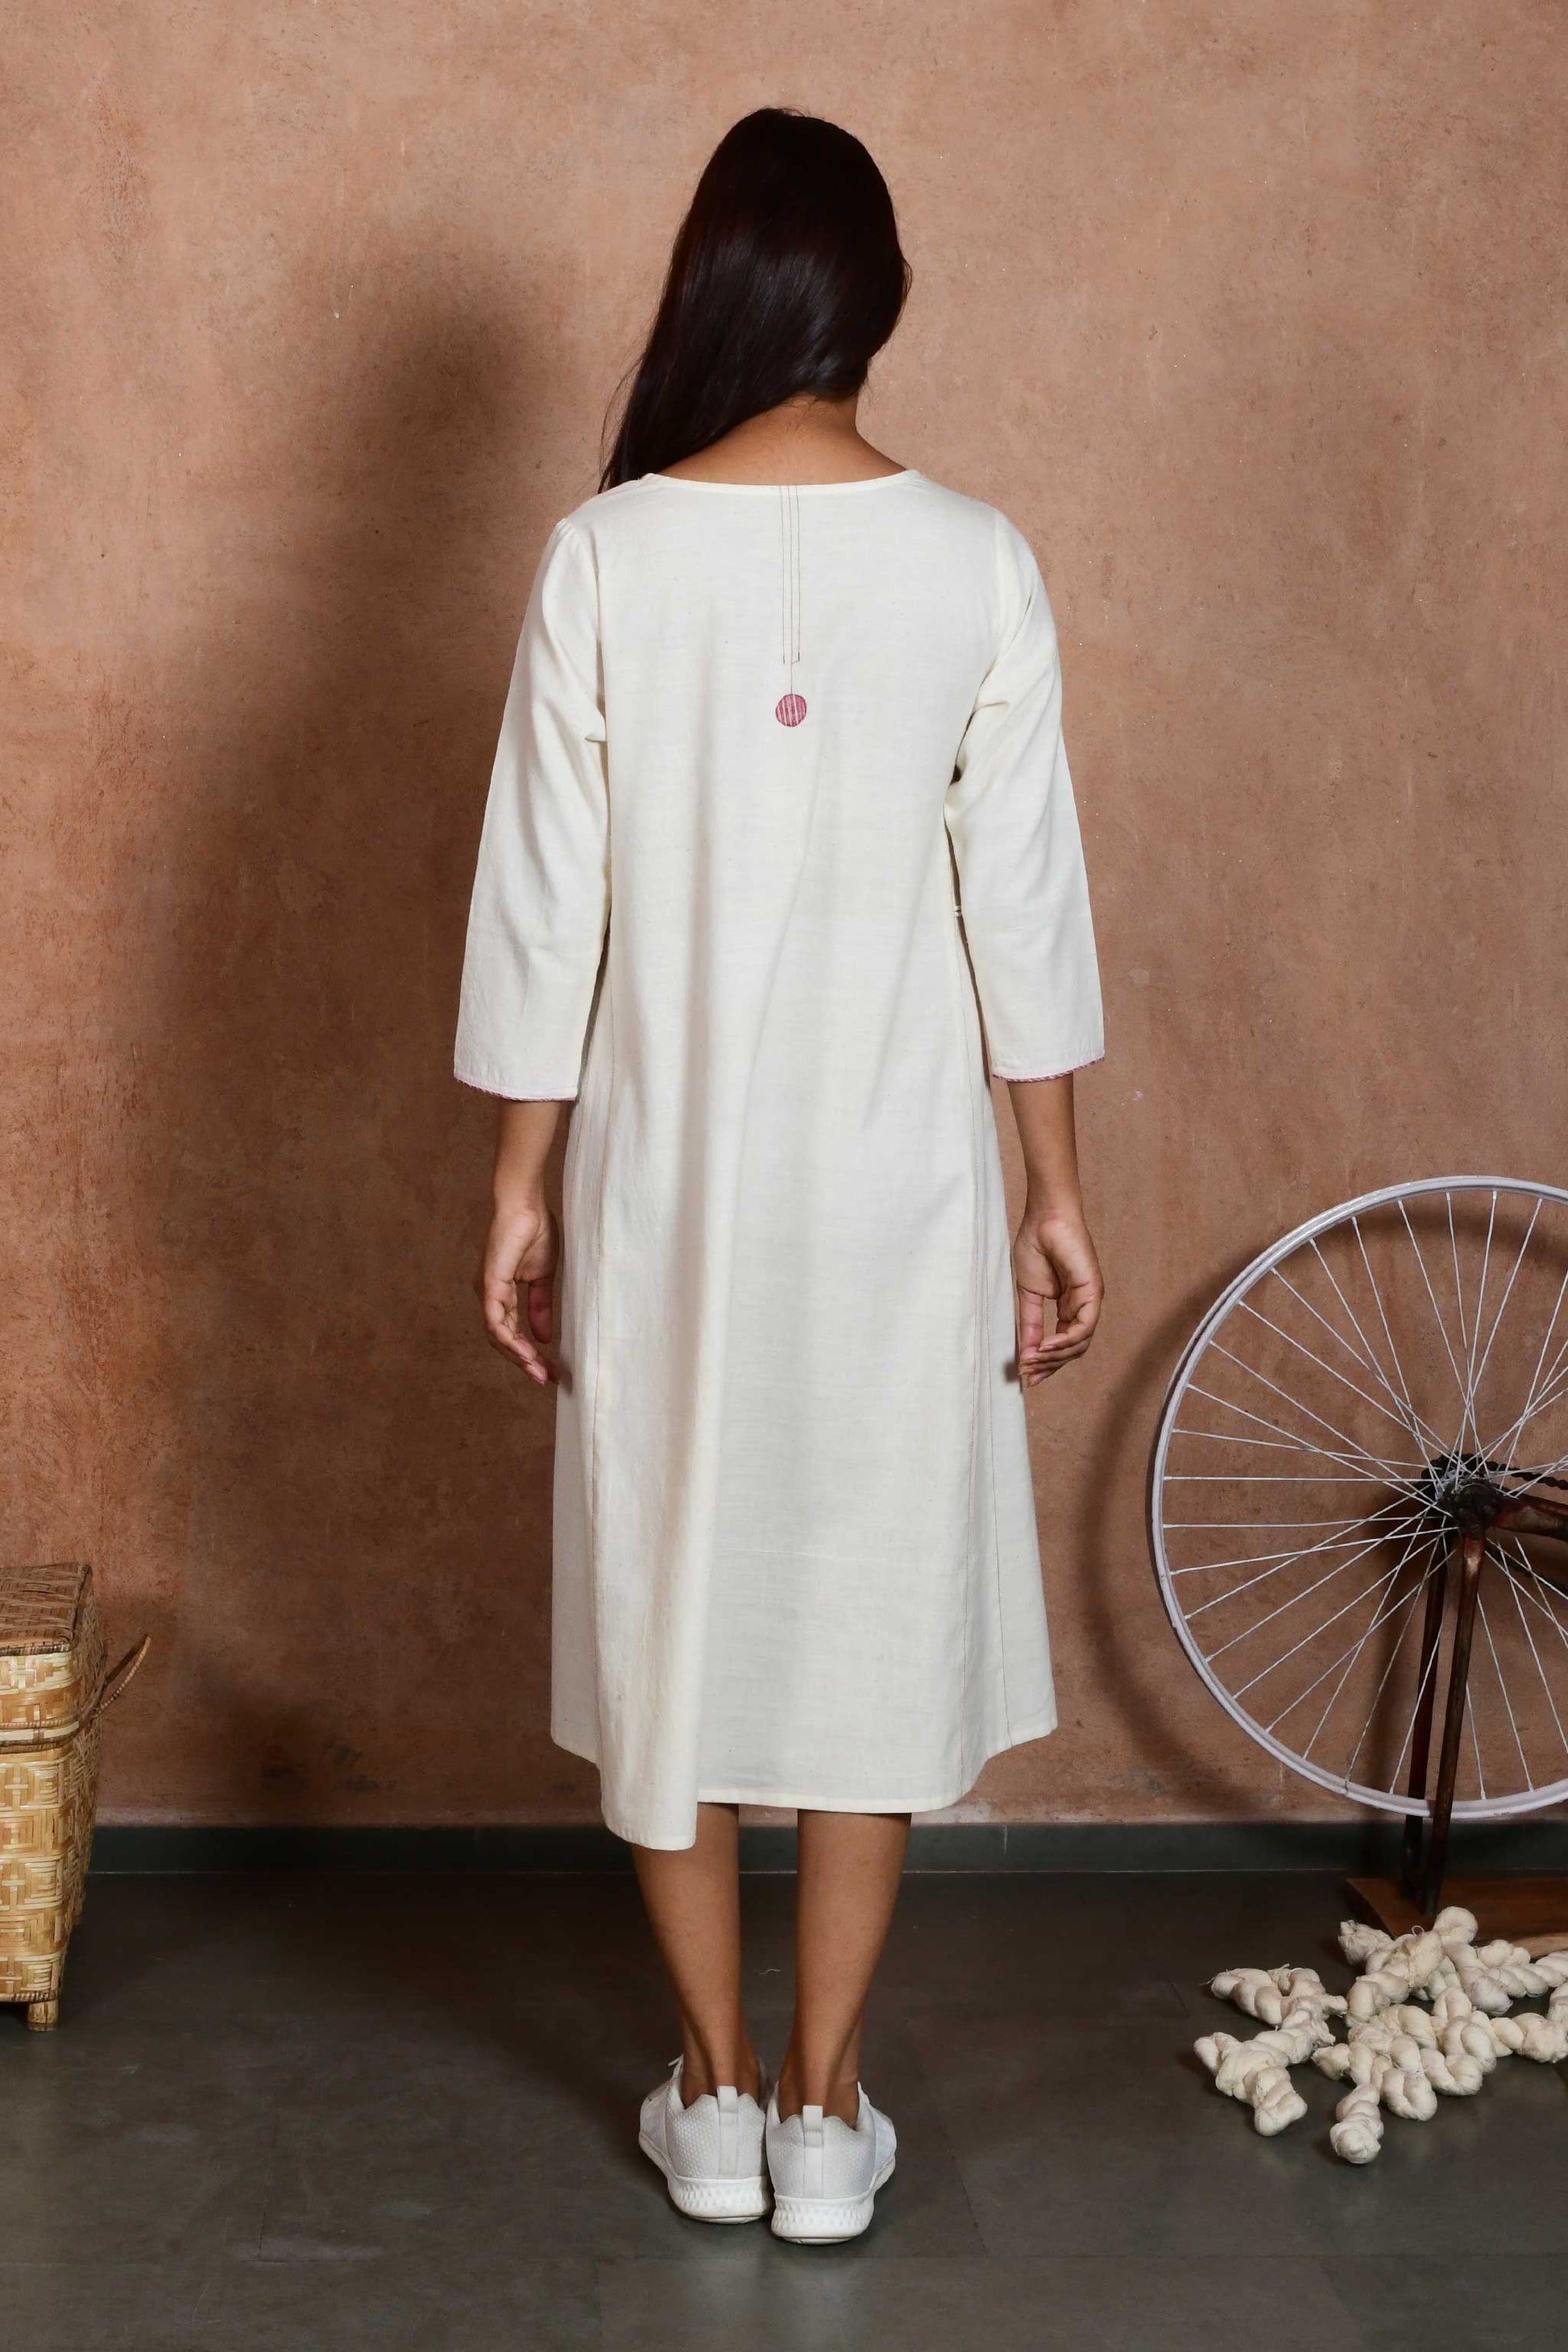 Back pose of a young indian model wearing a knee length off white dress with sleeves and a stitching detail on the back.